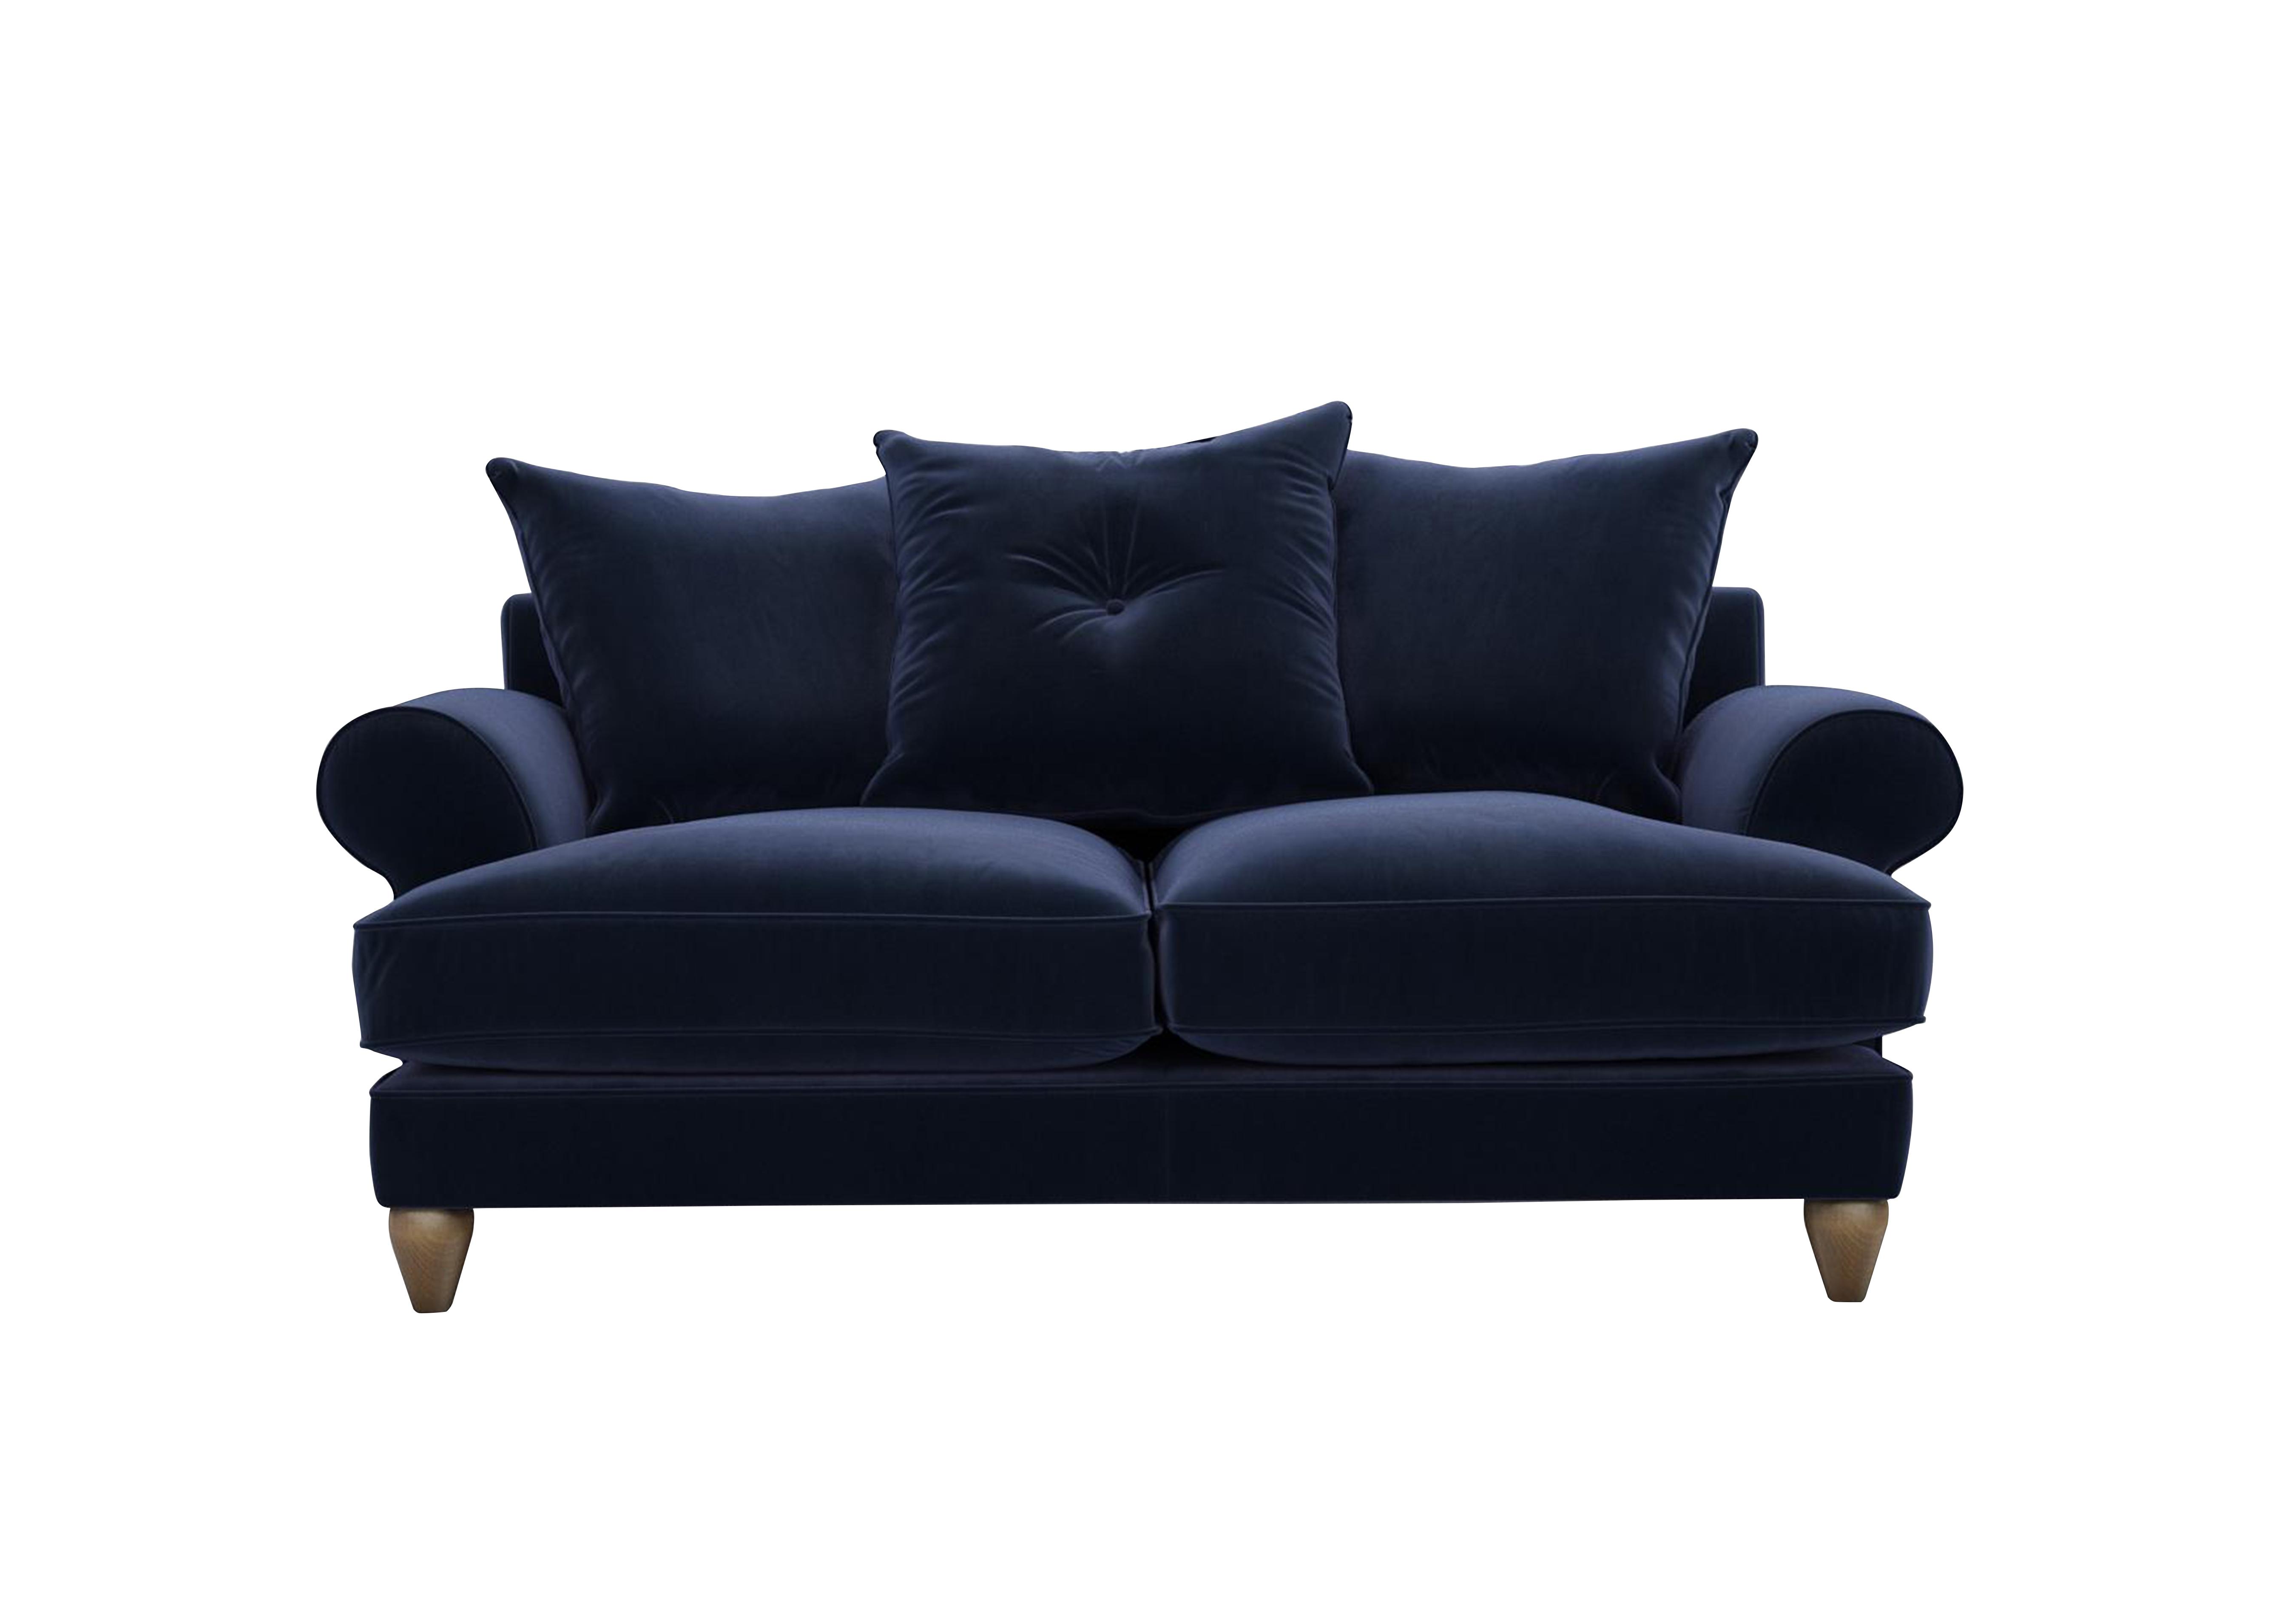 Bronwyn 2.5 Seater Fabric Scatter Back Sofa in Mid009 Midnight Indigo on Furniture Village